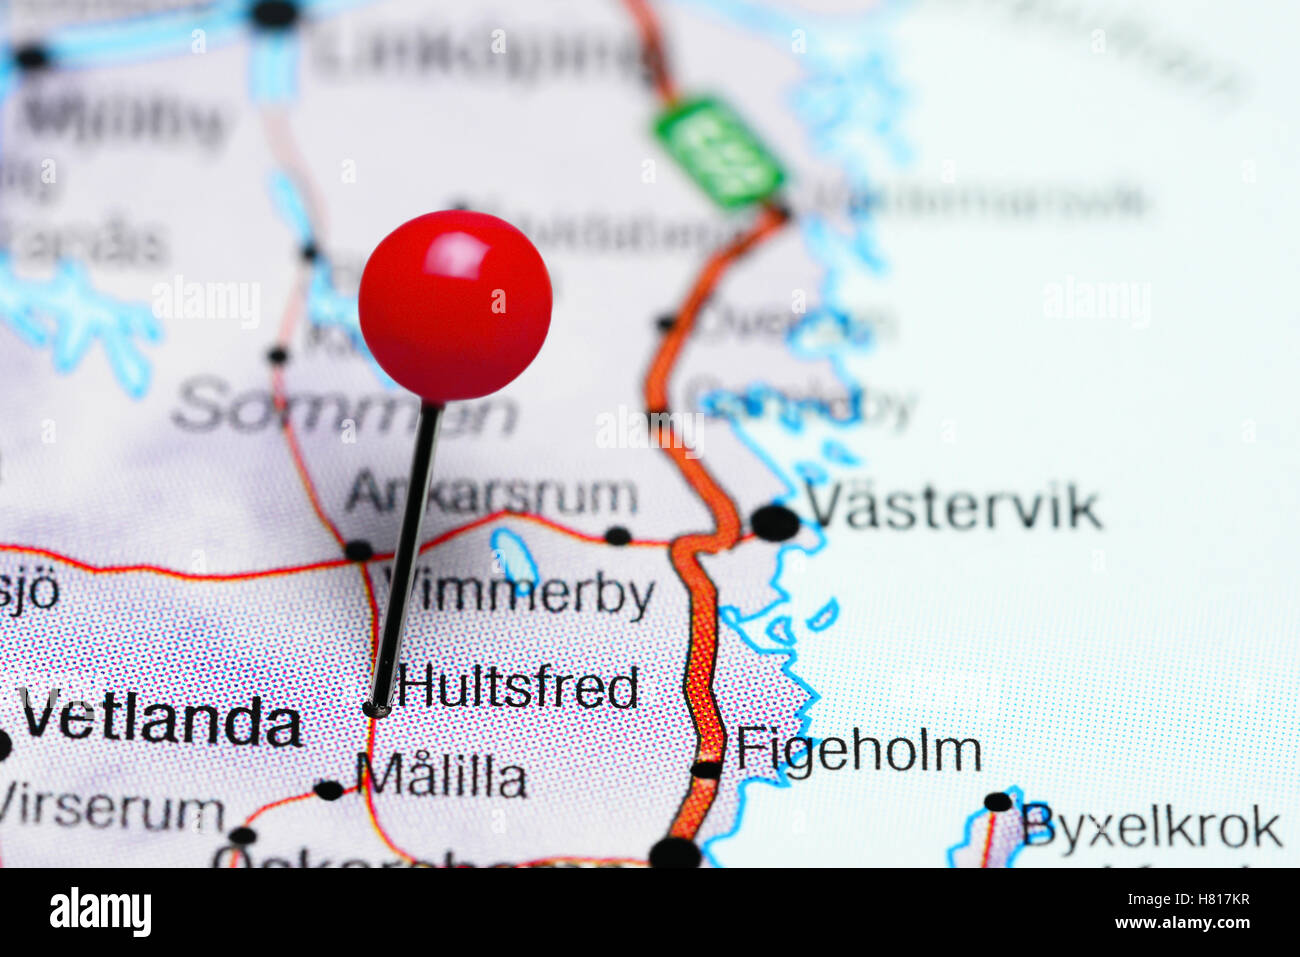 Hultsfred pinned on a map of Sweden Stock Photo